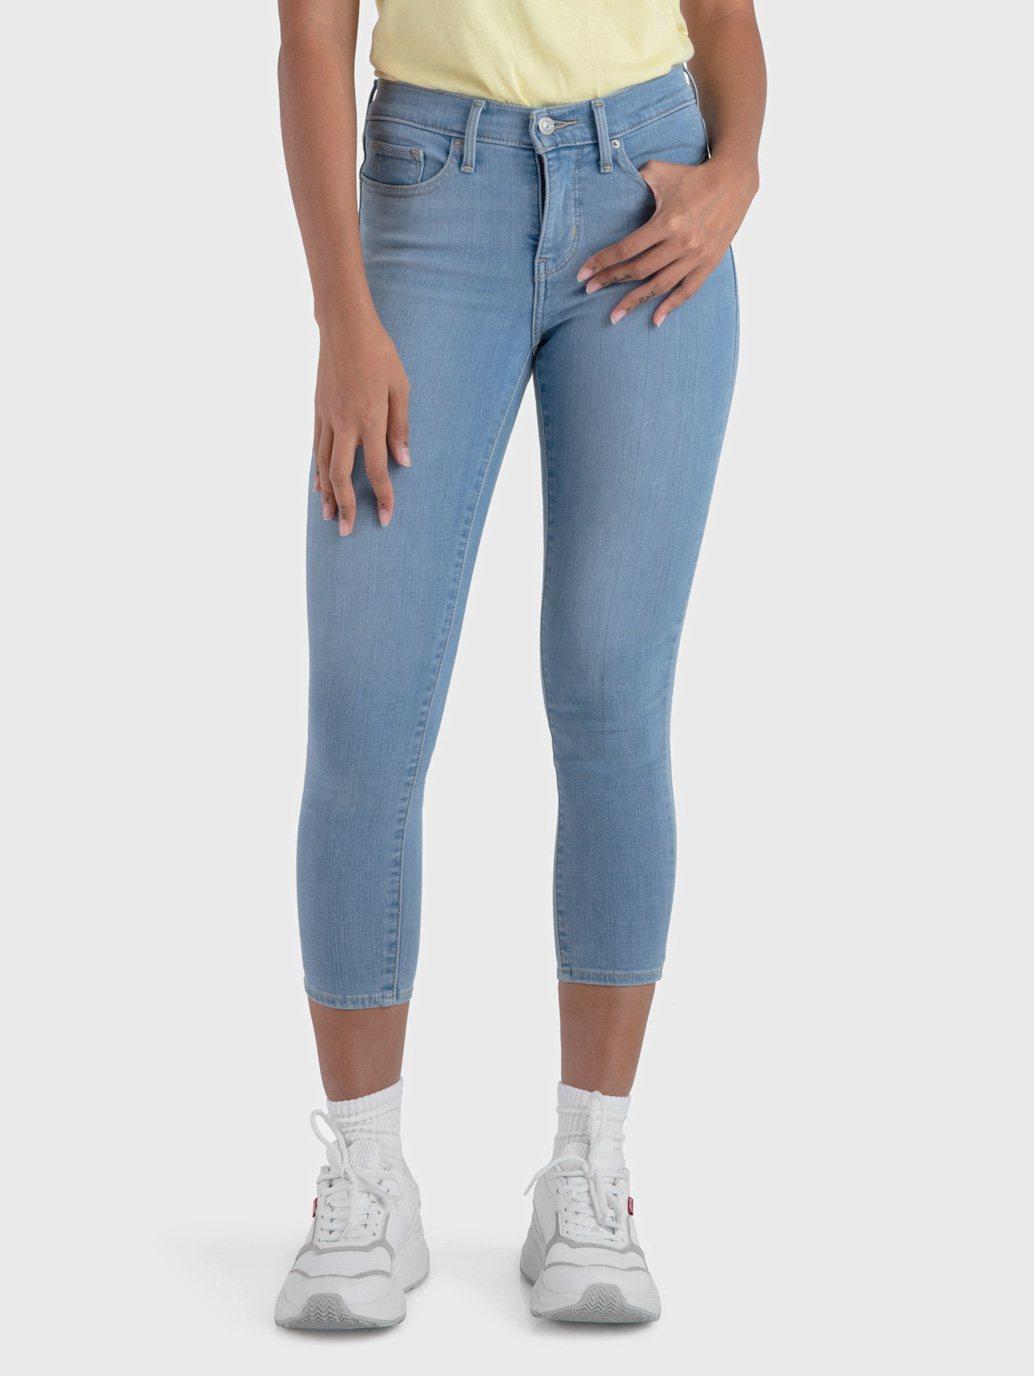 Buy 311 Shaping Cropped Skinny Jeans Levi S Official Online Store Sg